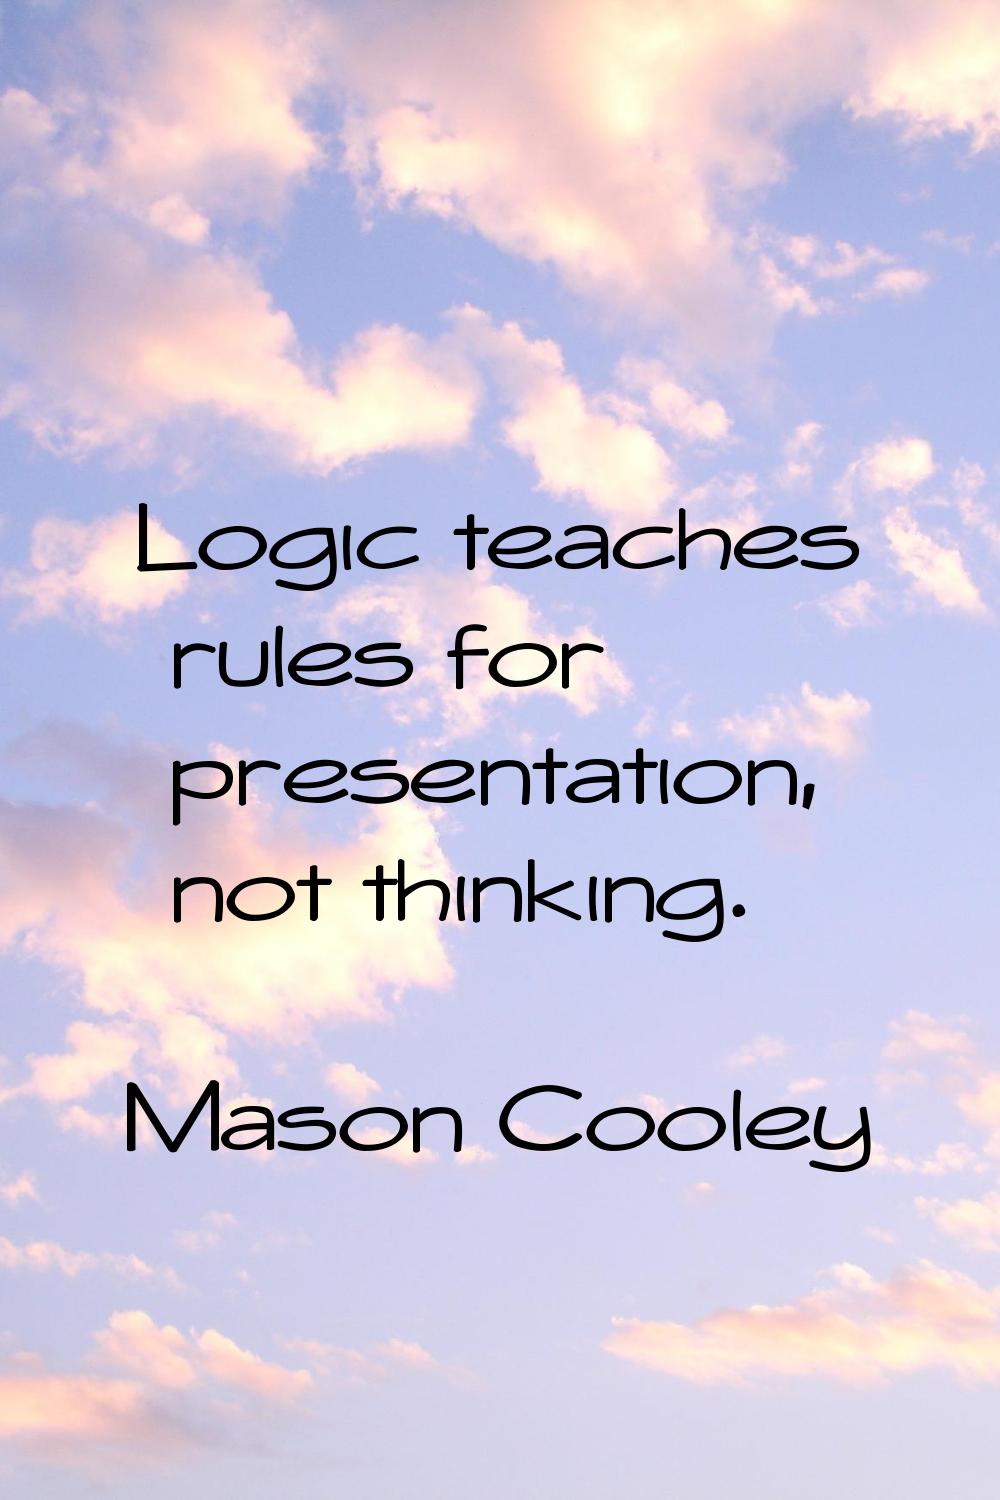 Logic teaches rules for presentation, not thinking.